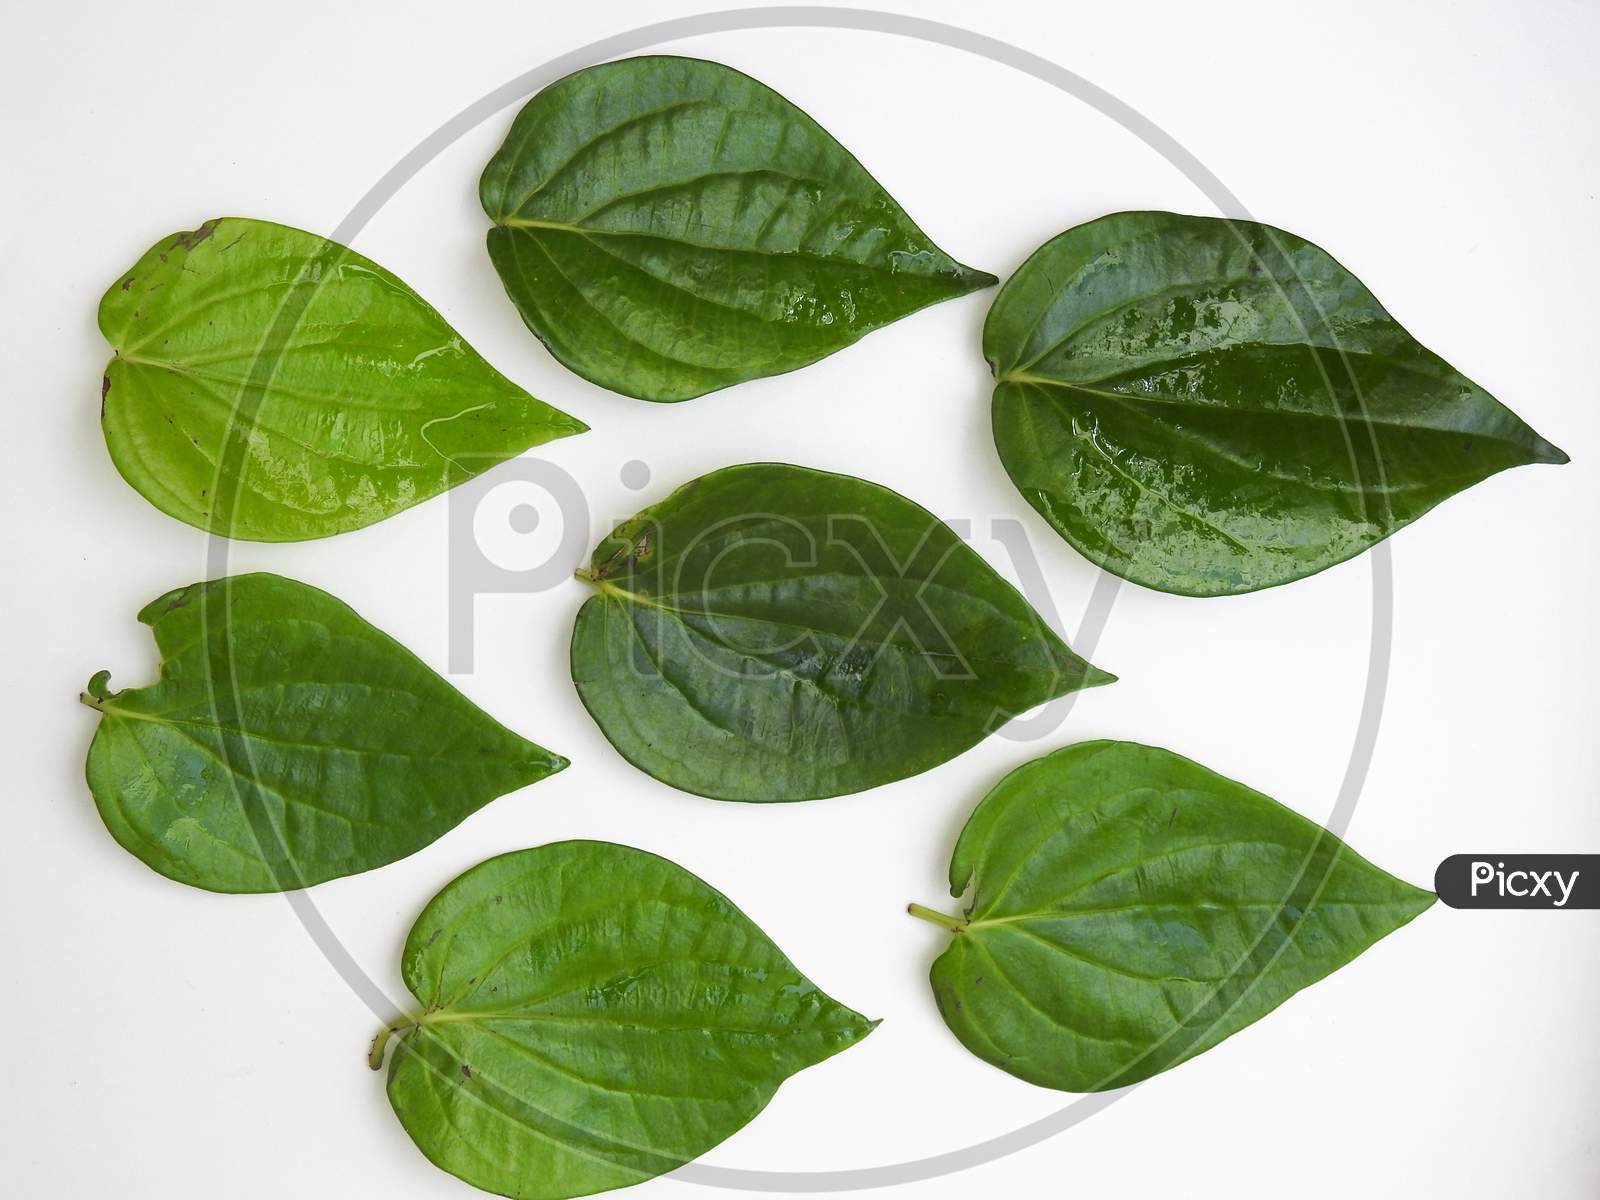 Indian Traditional Chewing For Digestion Of Betel Leaves And Betelnut Isolated On White Background